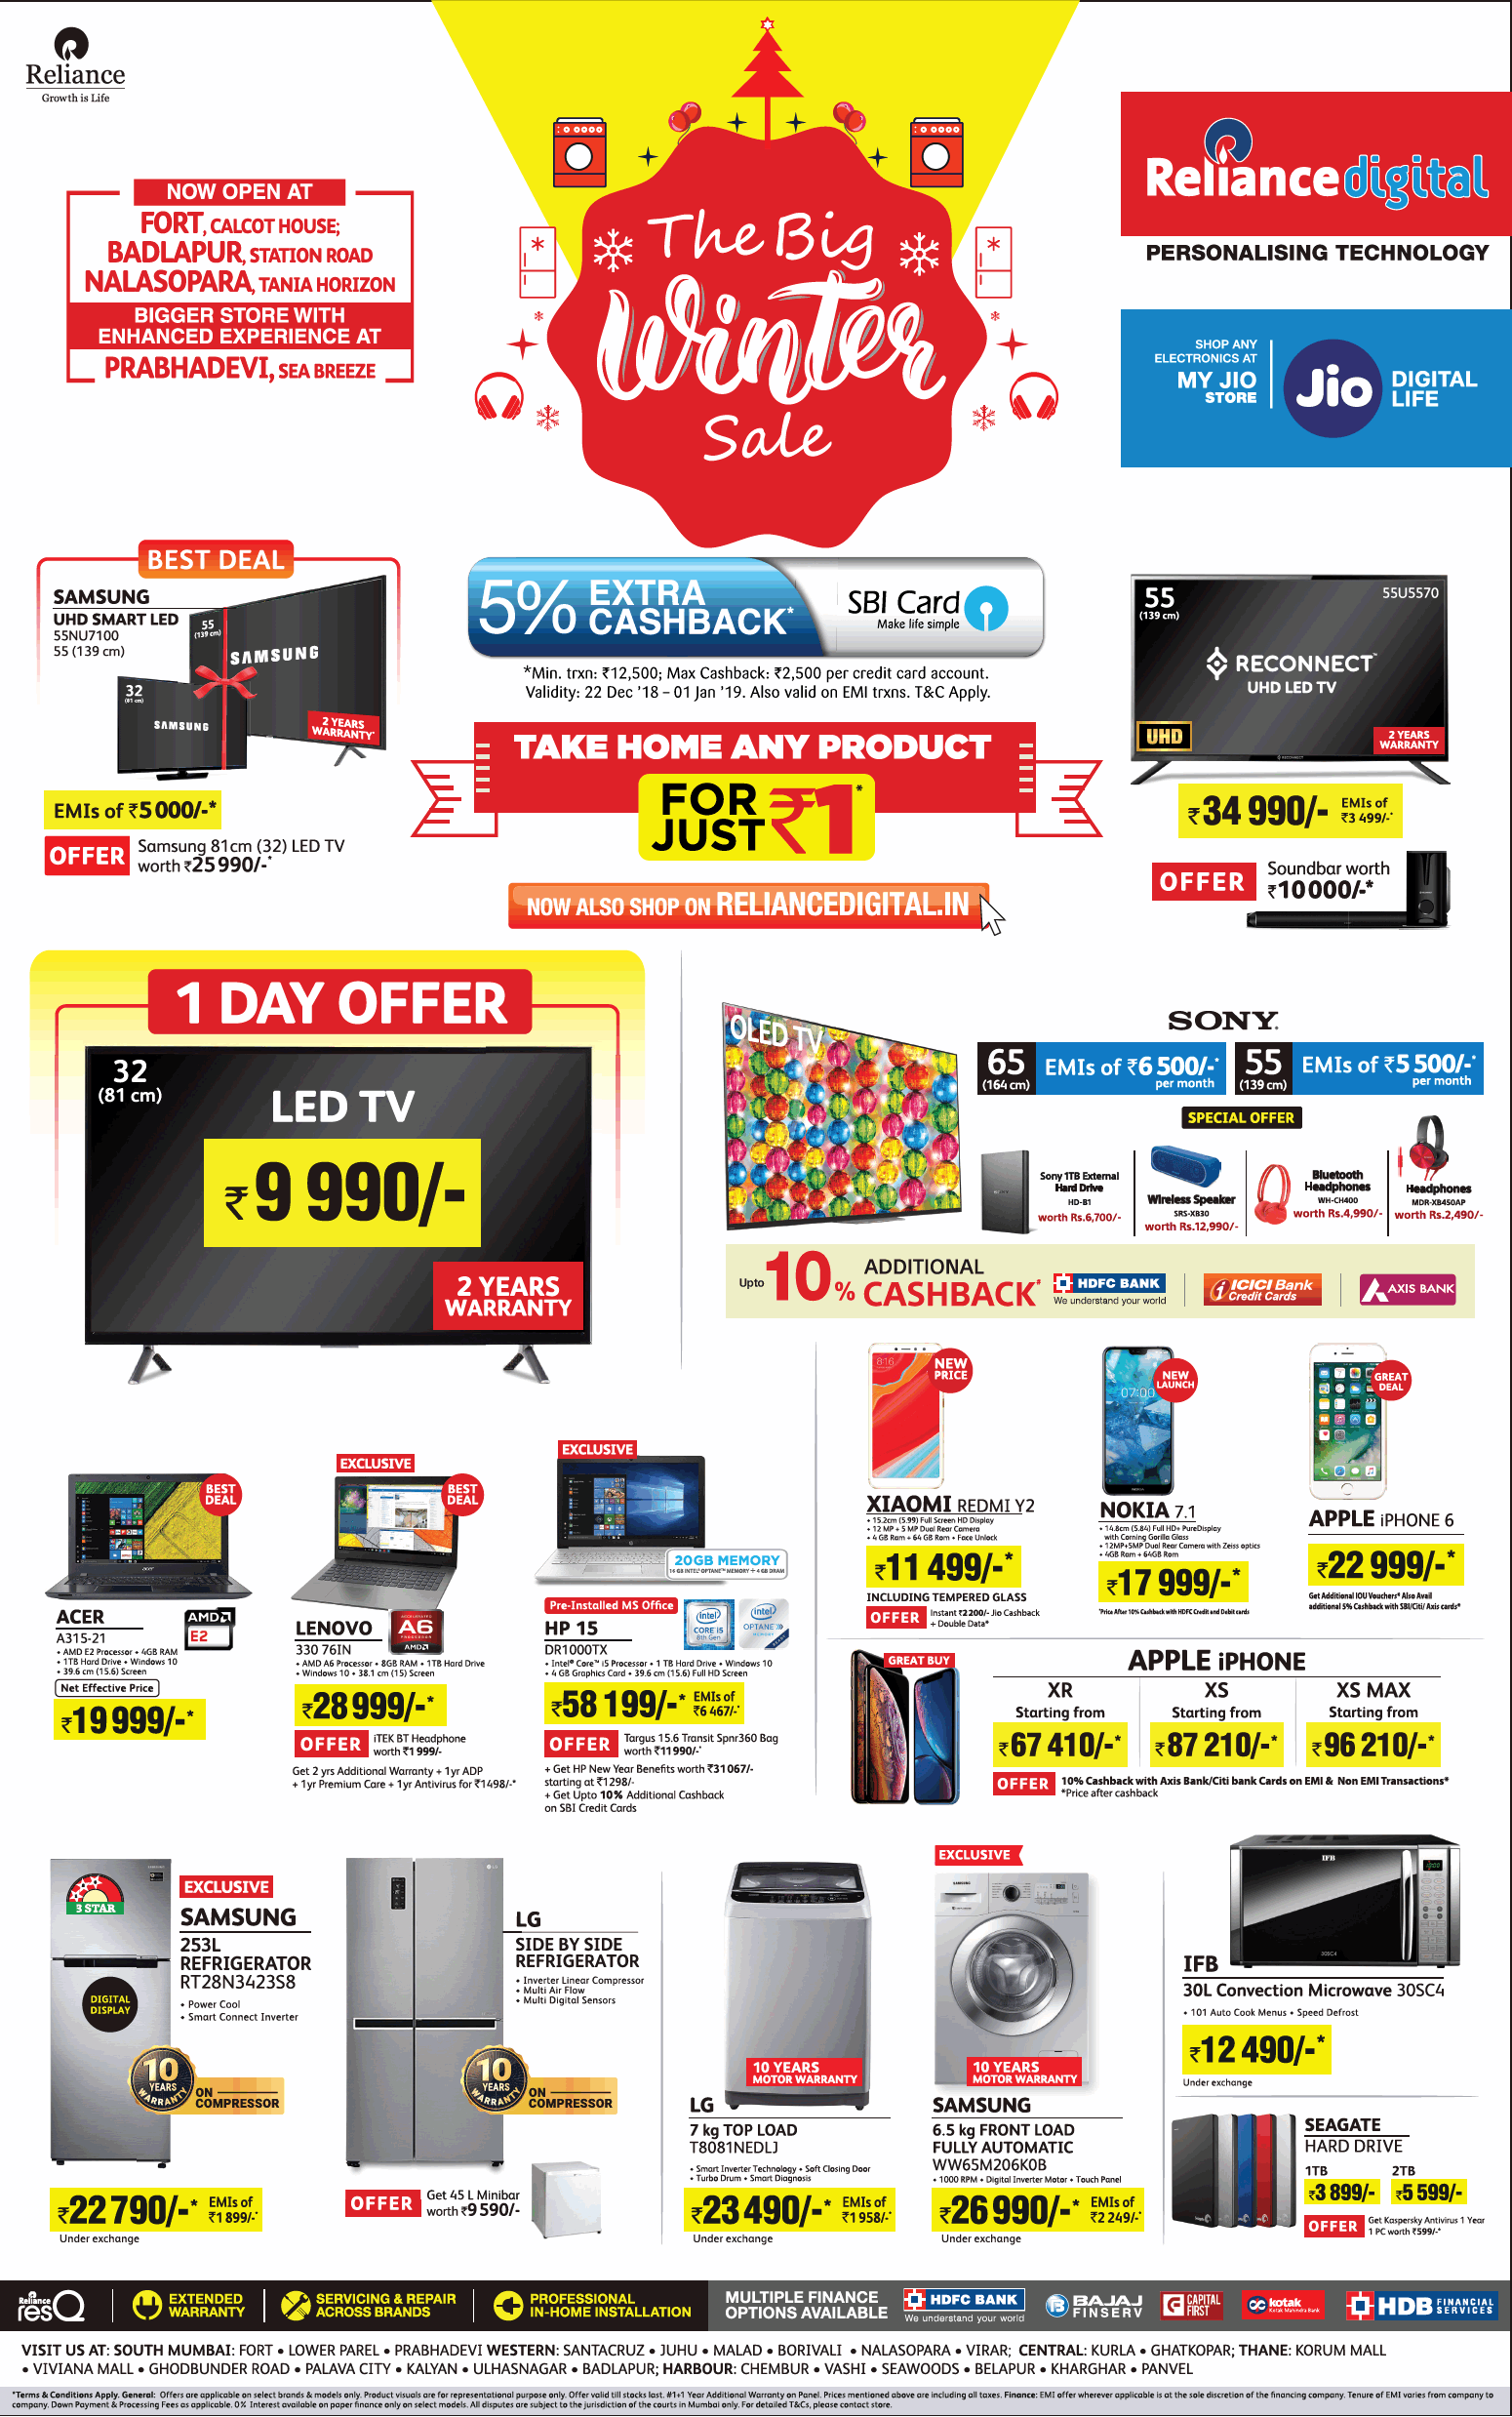 reliance-digital-the-big-winter-sale-take-home-any-product-for-rs-1-ad-bombay-times-01-01-2019.png